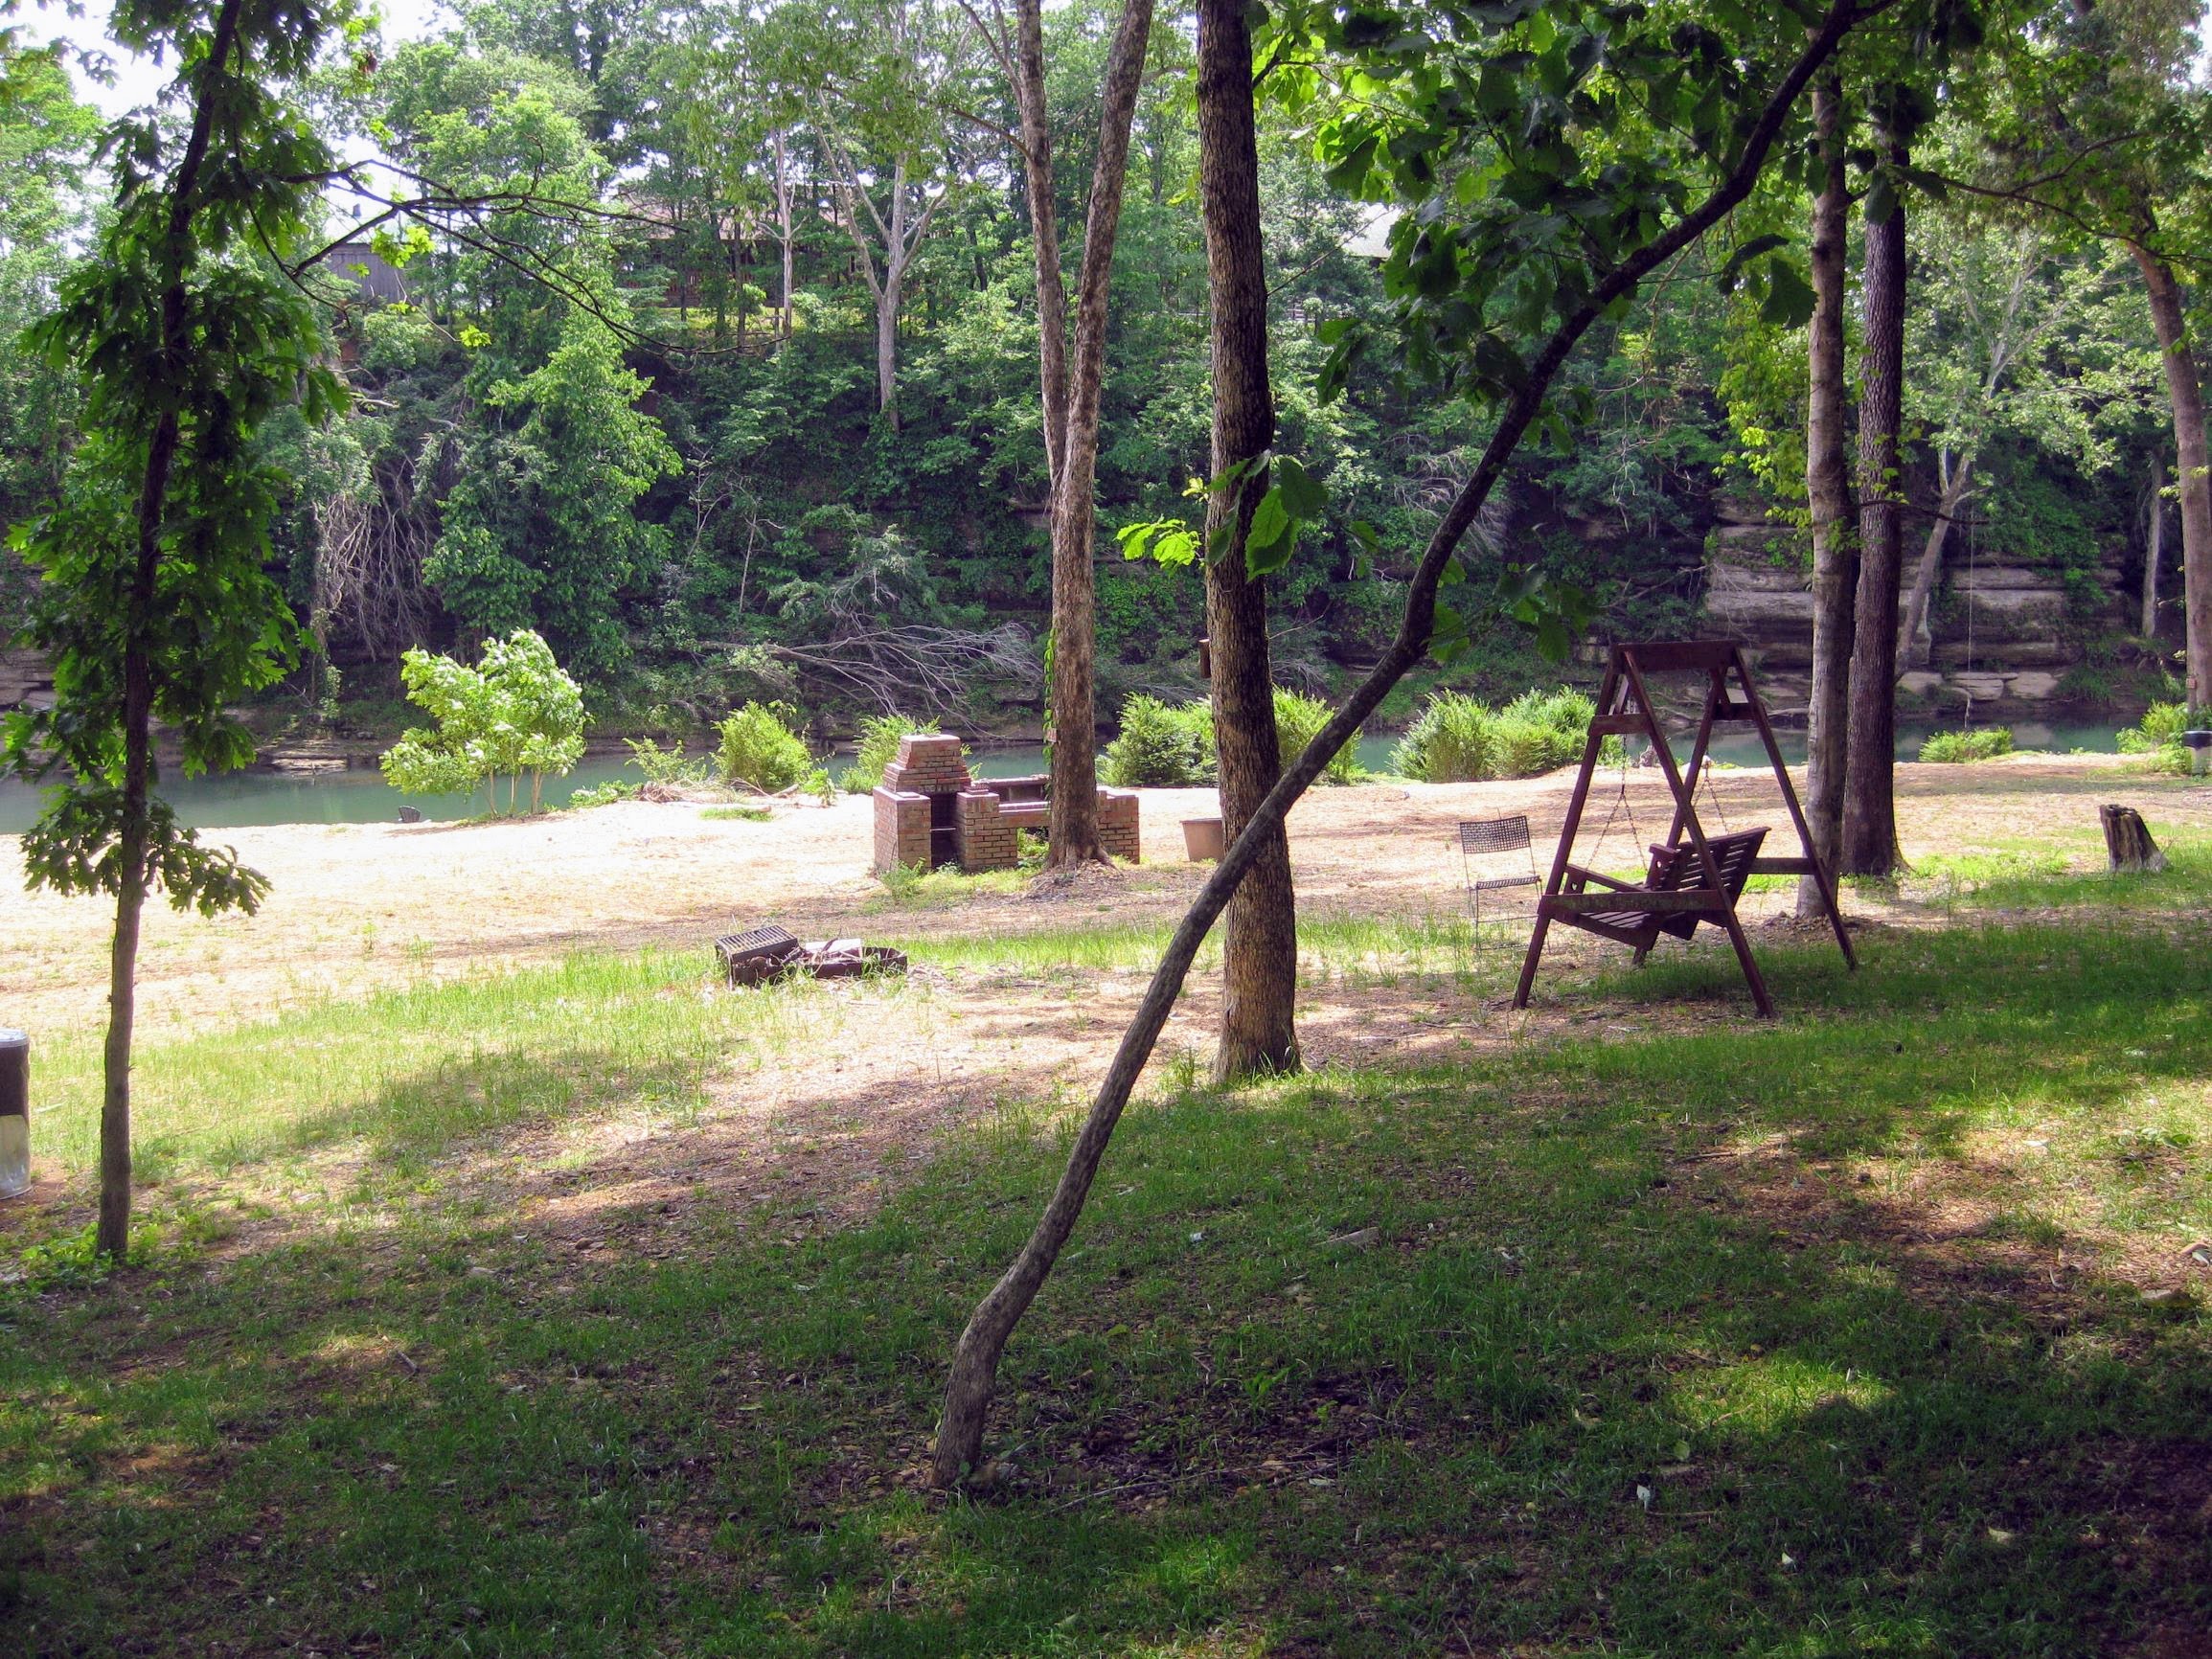 View of the campground swing